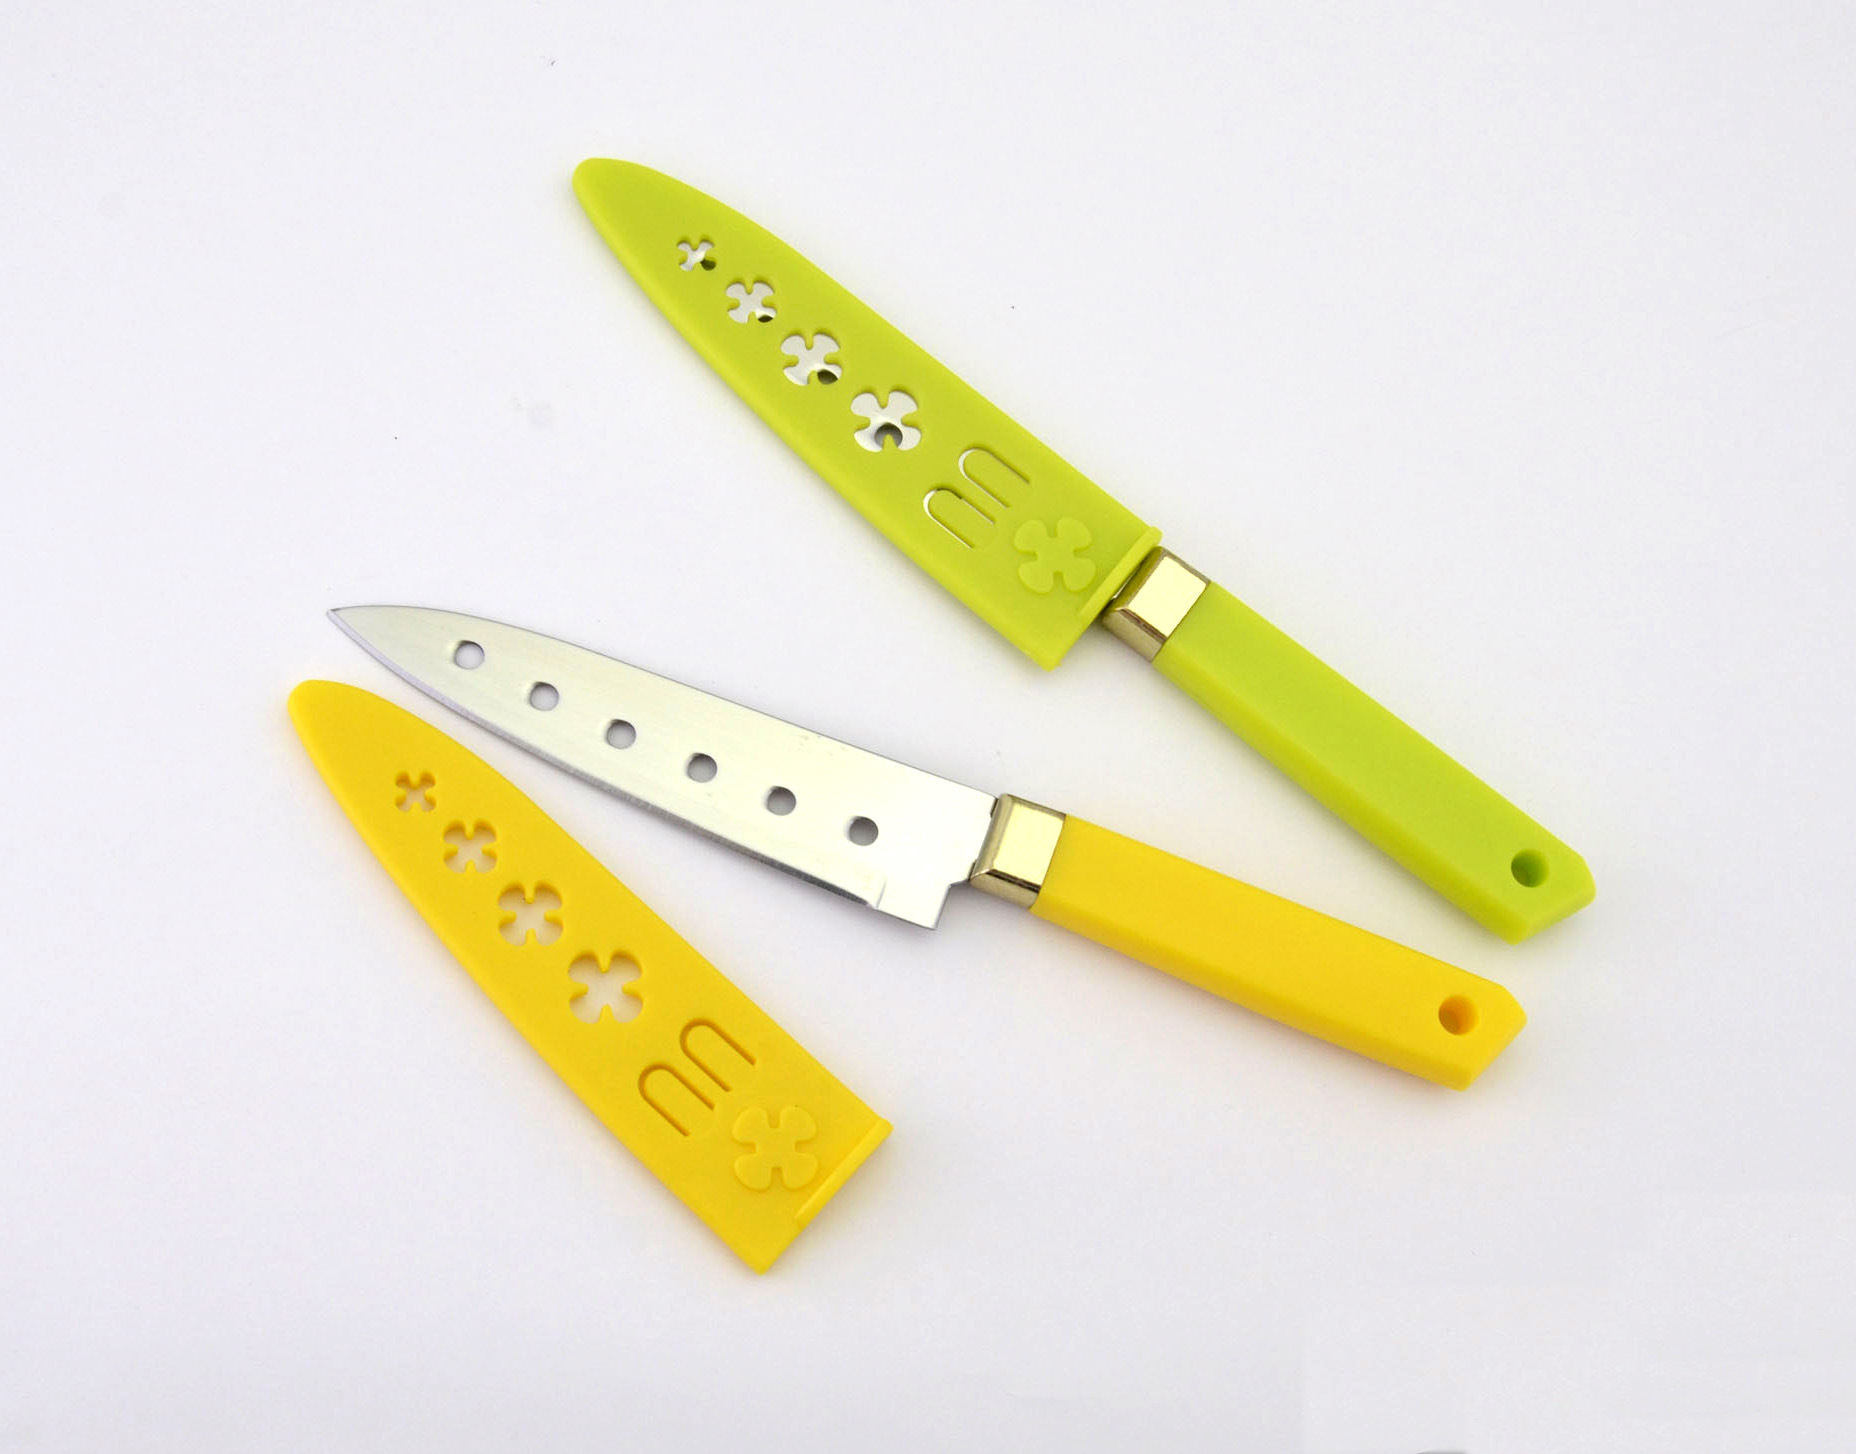 6 Holes and Sheath Kitchenware Stainless Steel Utility Paring Knives